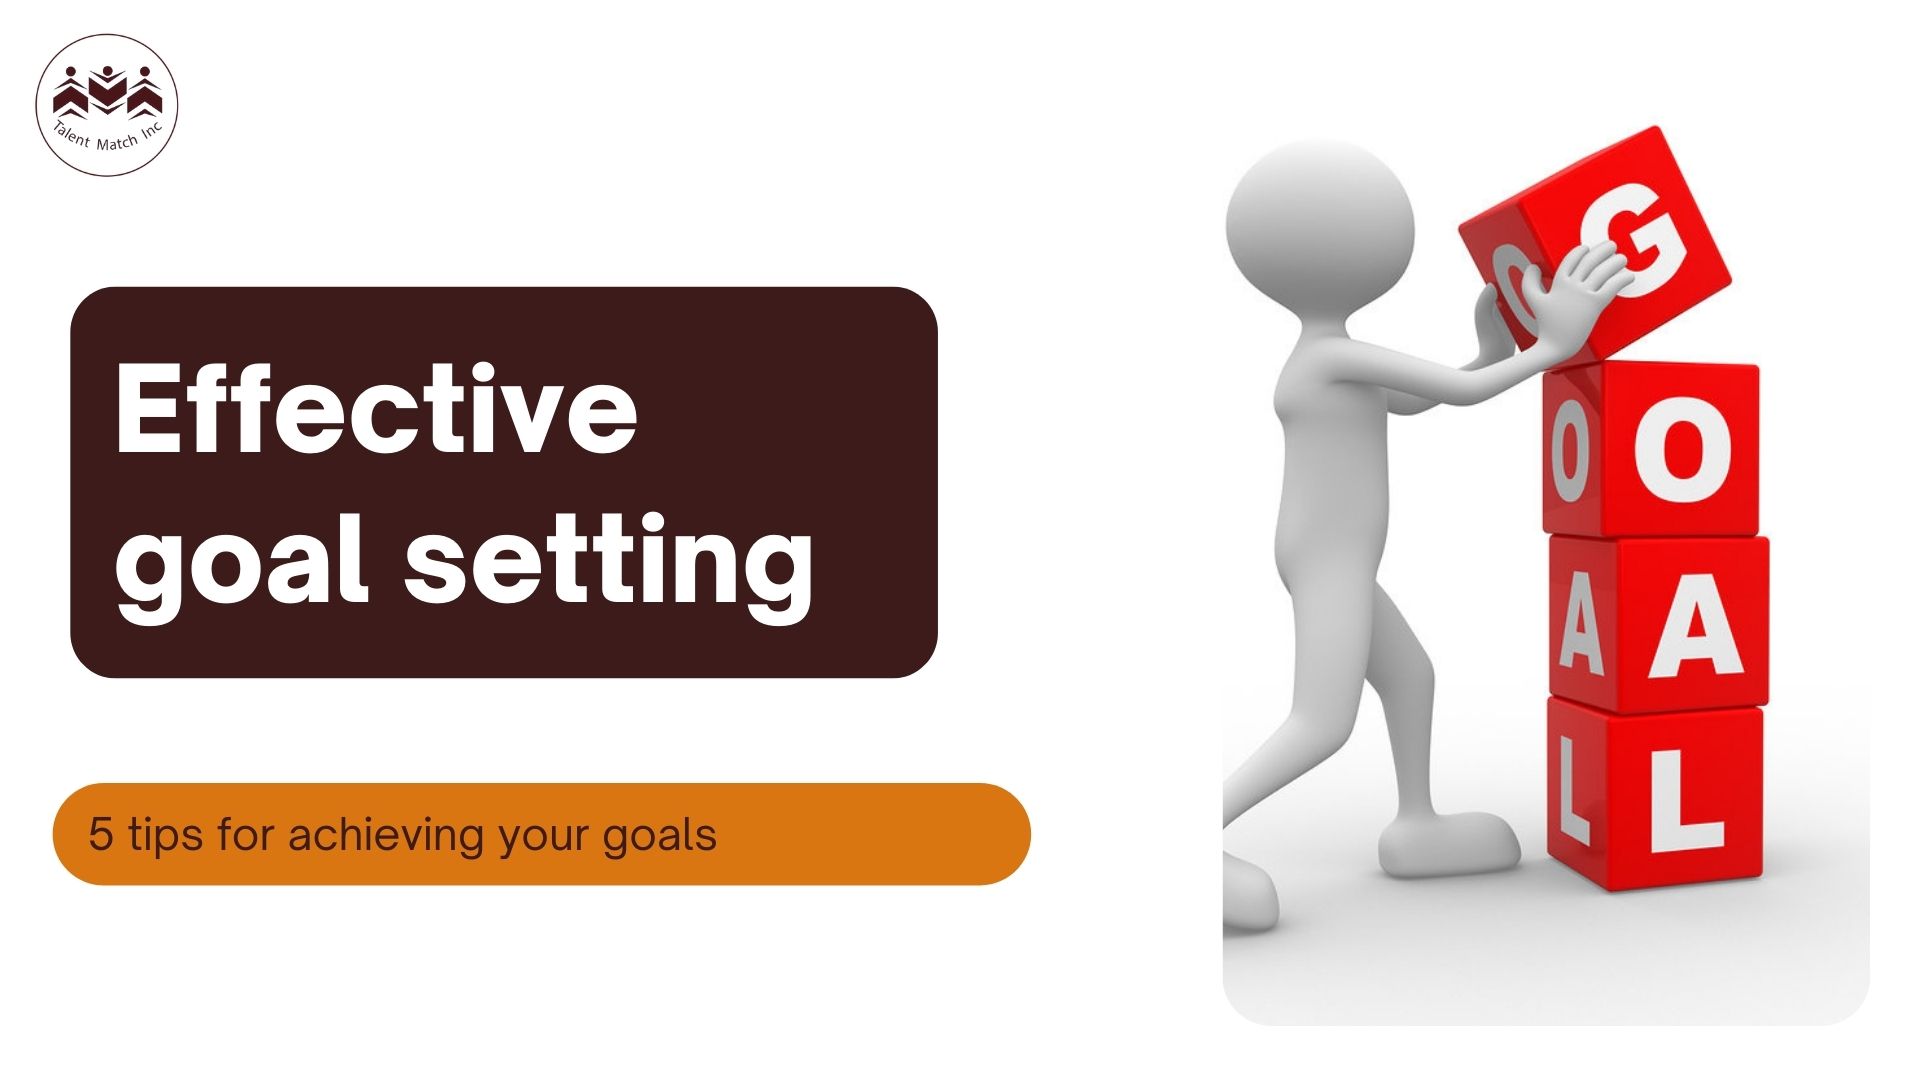 Effective goal setting: 5 tips for achieving your goals